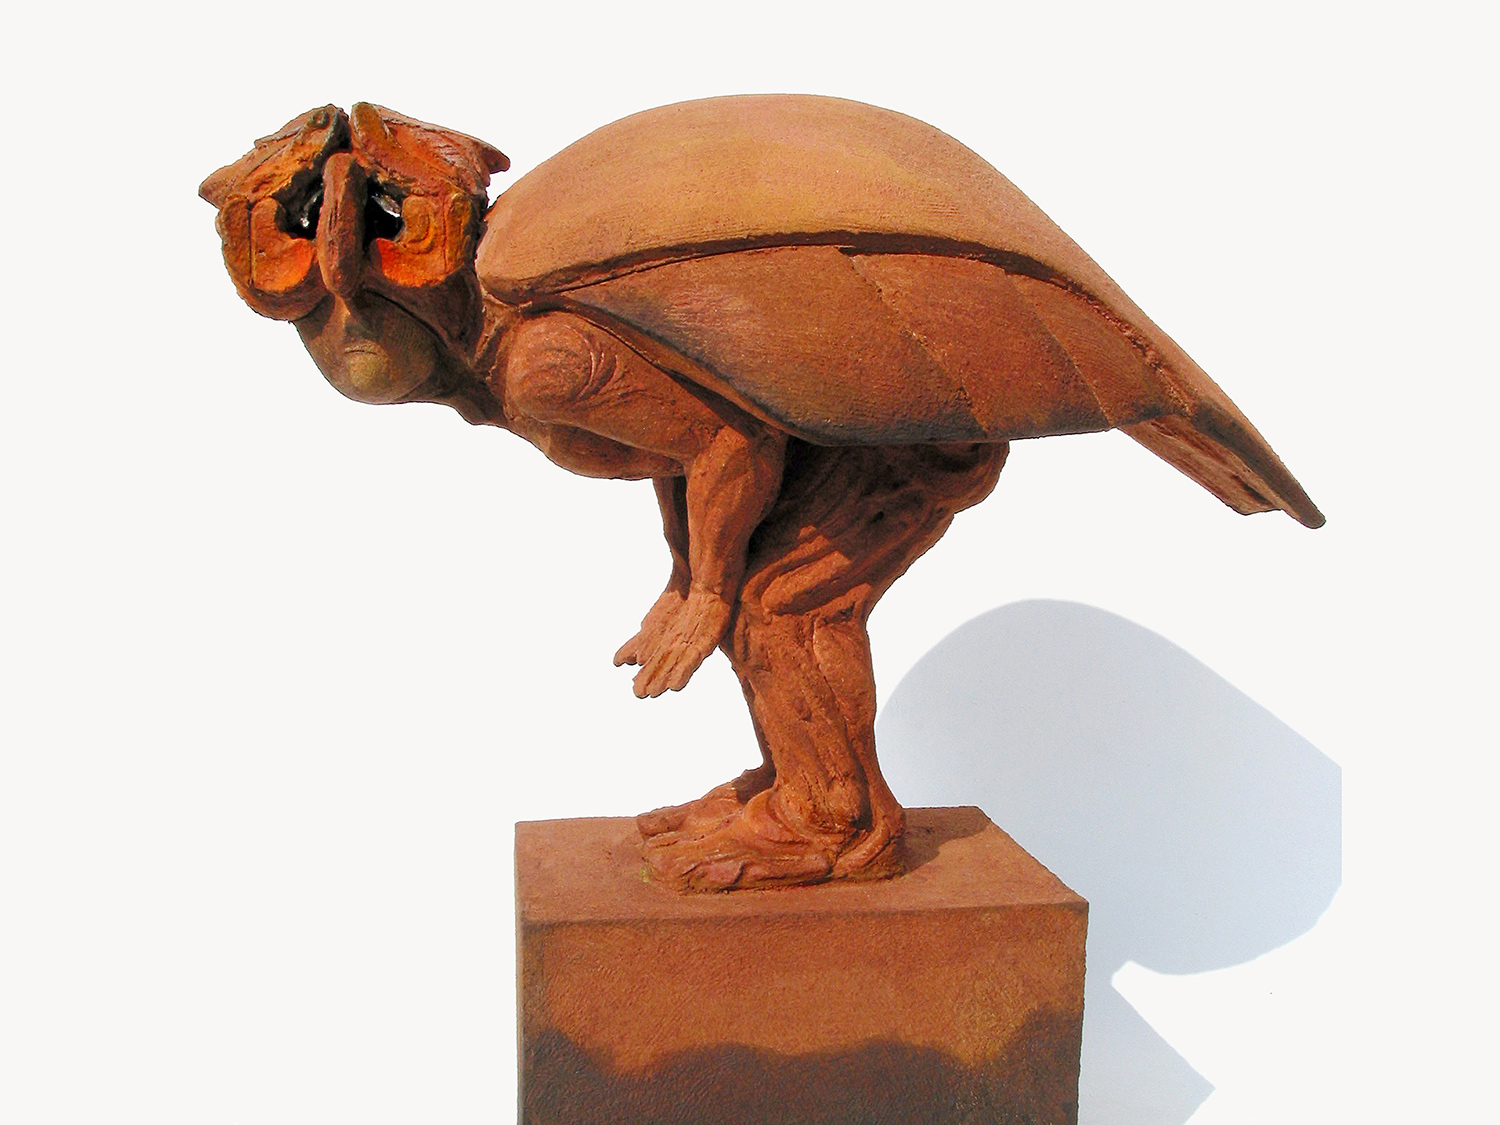  Monsieur Bubo &nbsp; ©&nbsp;  51 cm high x 56 cm wide  Unique.  Bubo Bubo – the owl.  Here, a human form seems to have occupied a shell-like body with an owl mask. He crouches uneasily and looks anxiously through his new eyes. “He crept out of the s